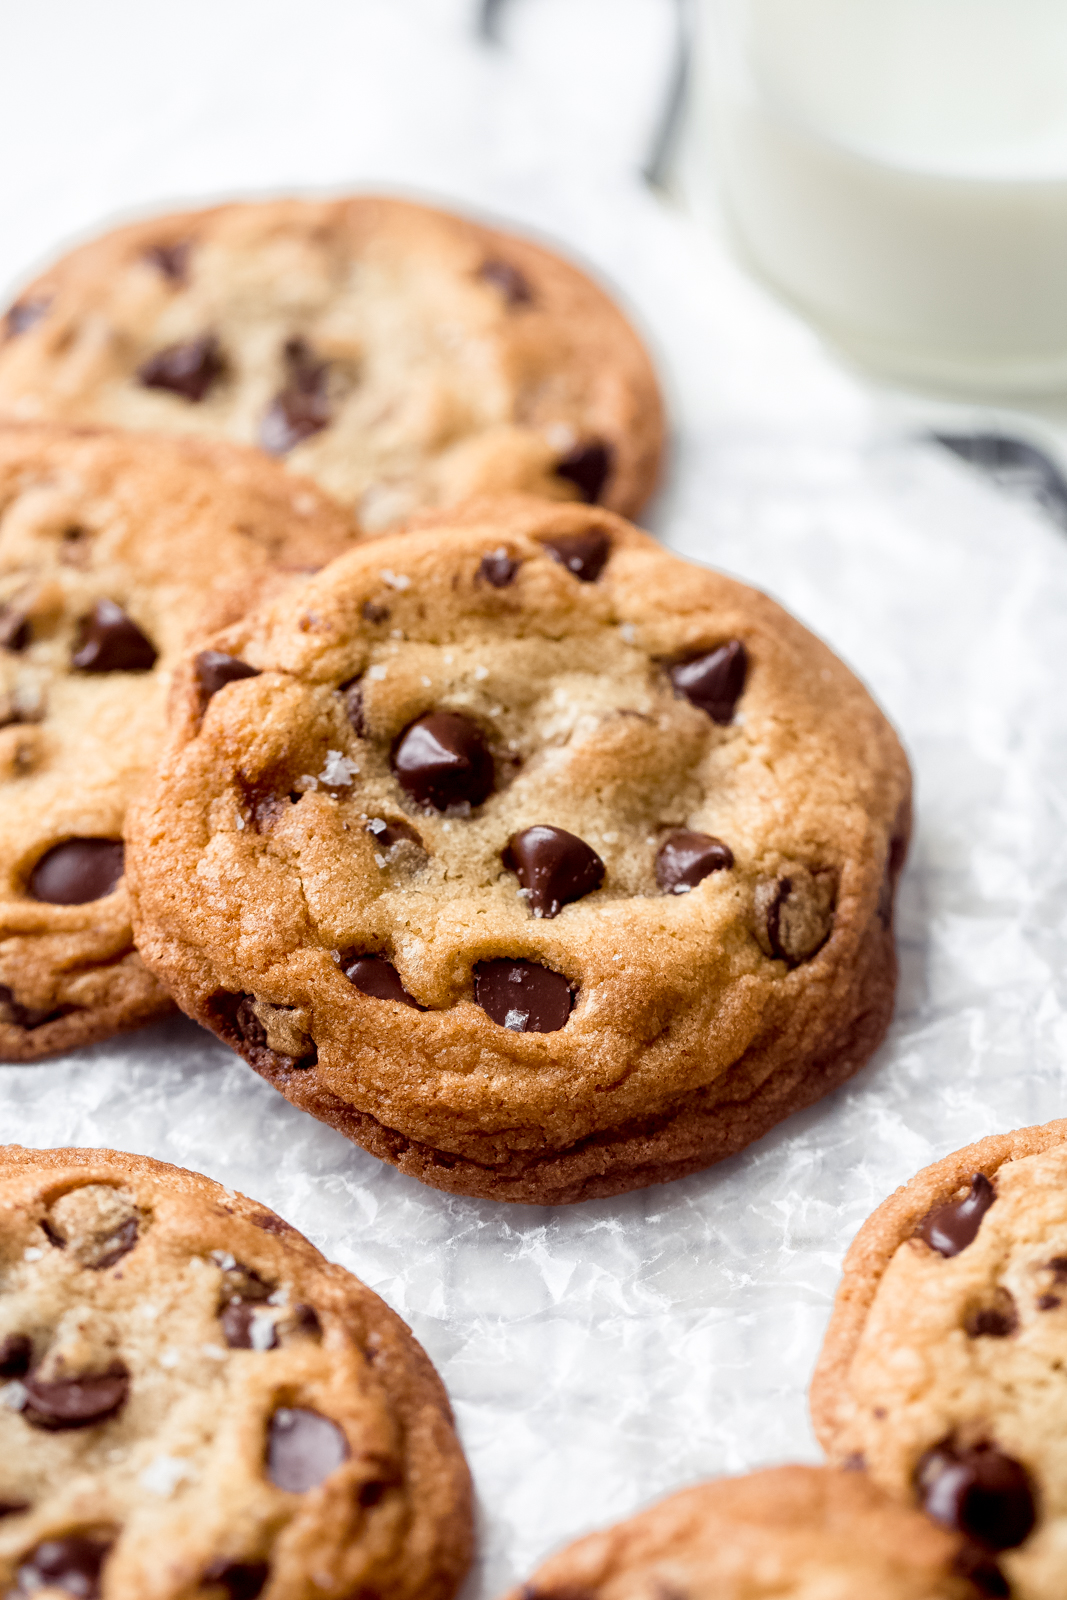 Extra Chewy Chocolate Chip Cookies Recipe - Little Spice Jar